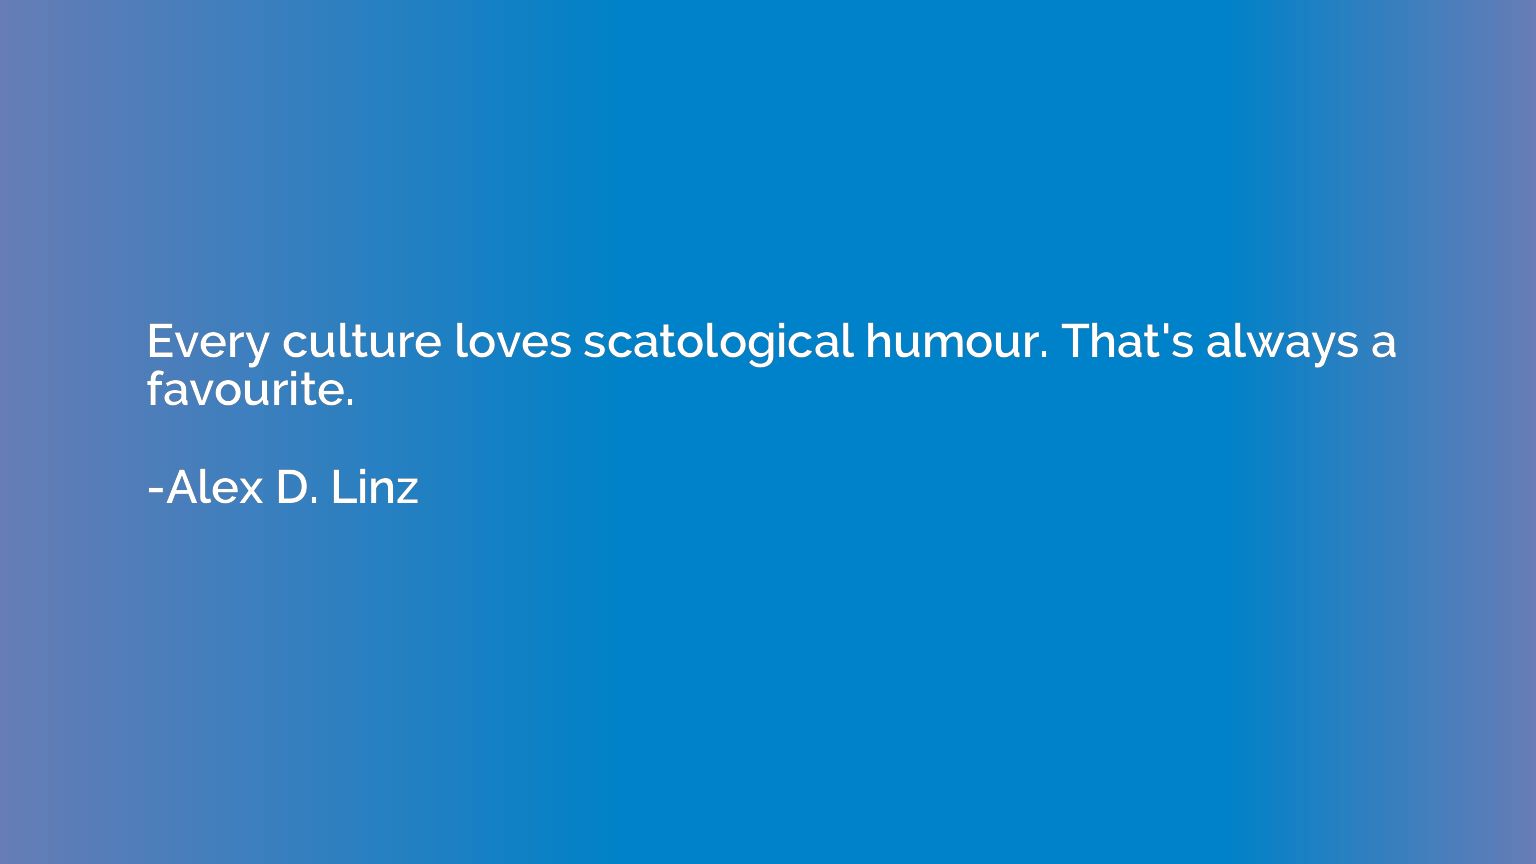 Every culture loves scatological humour. That's always a fav